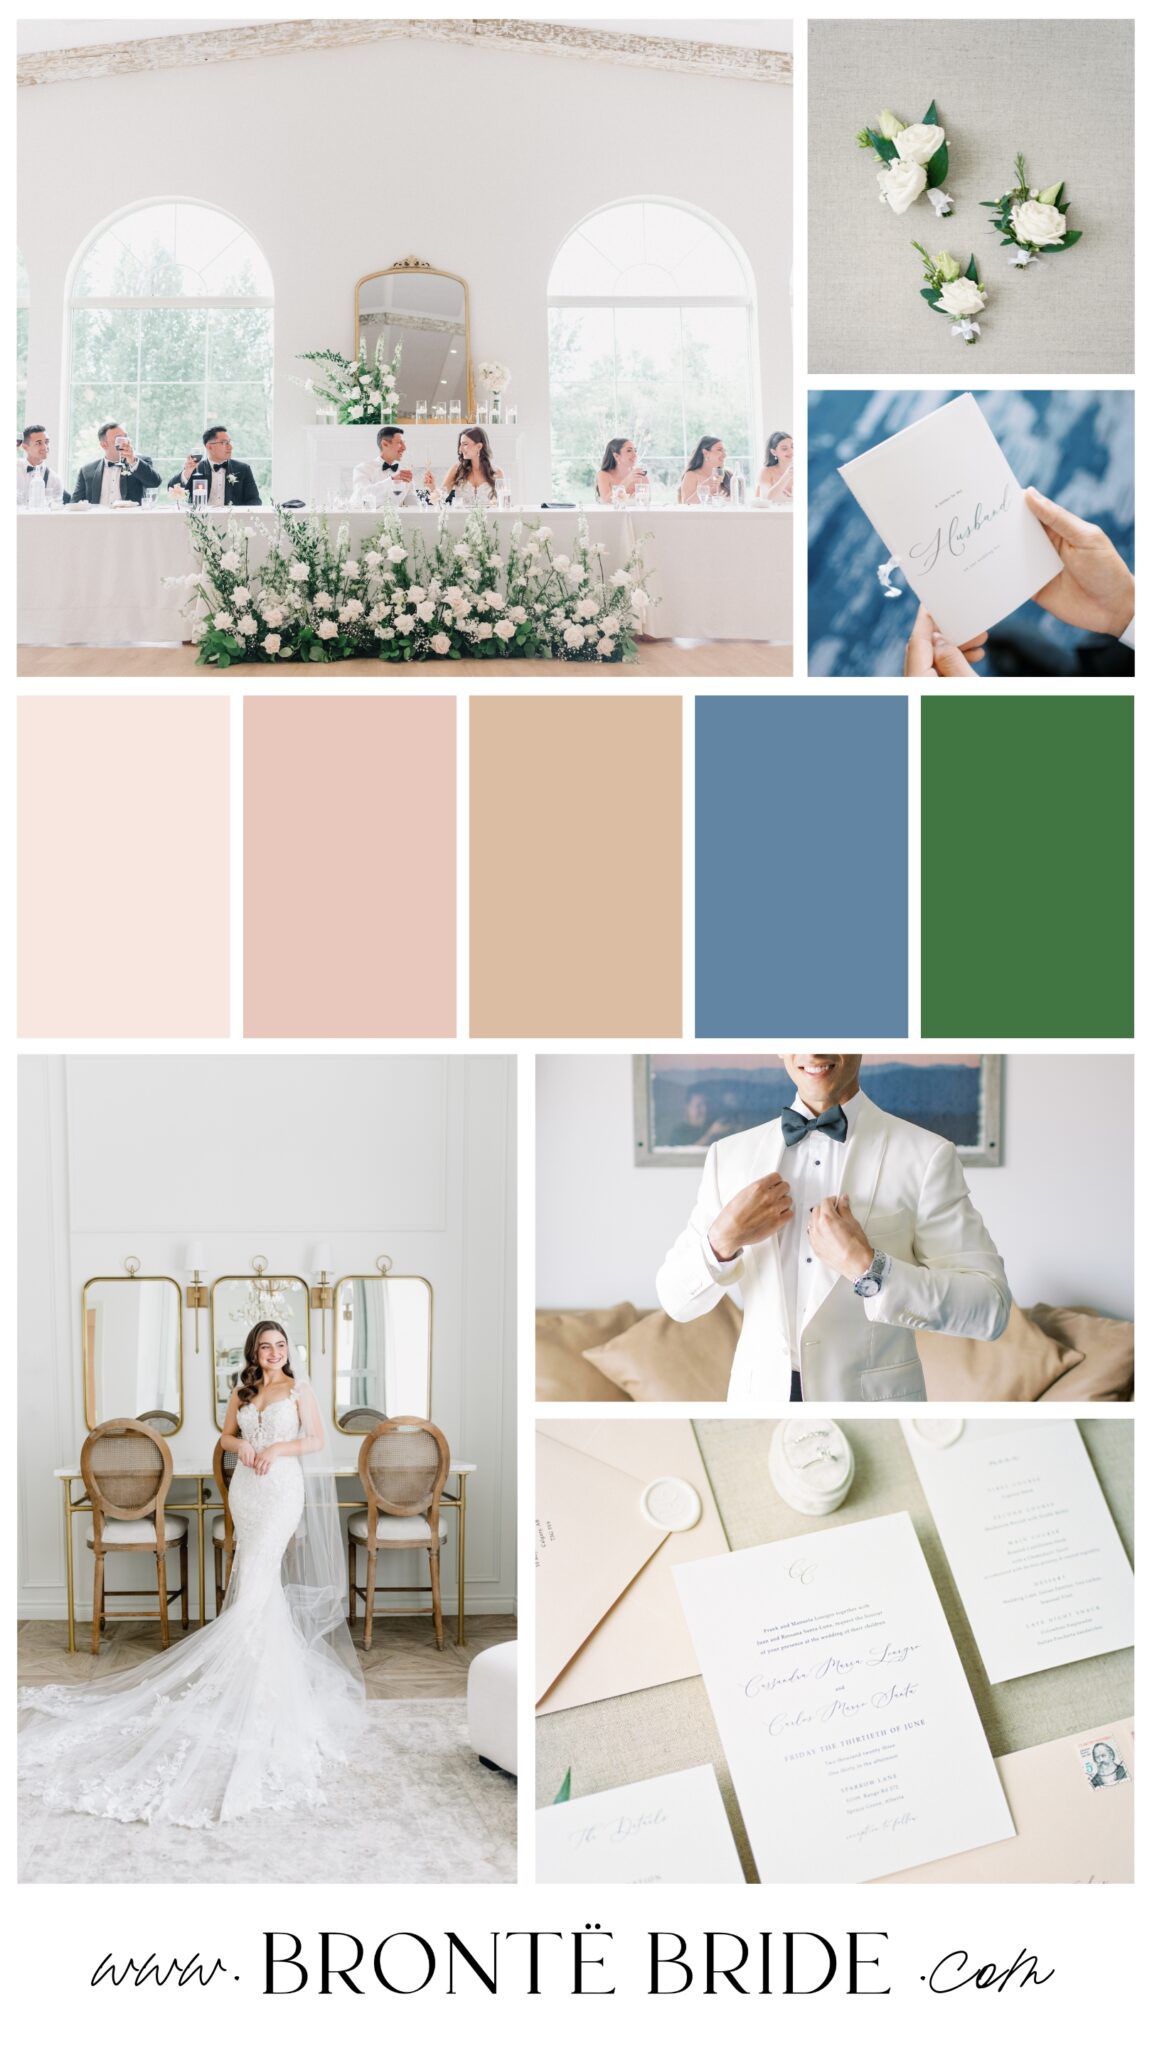 Real wedding colour palette inspiration, blush pink and taupe - wedding colour schemes and moodboards from Bronte Bride